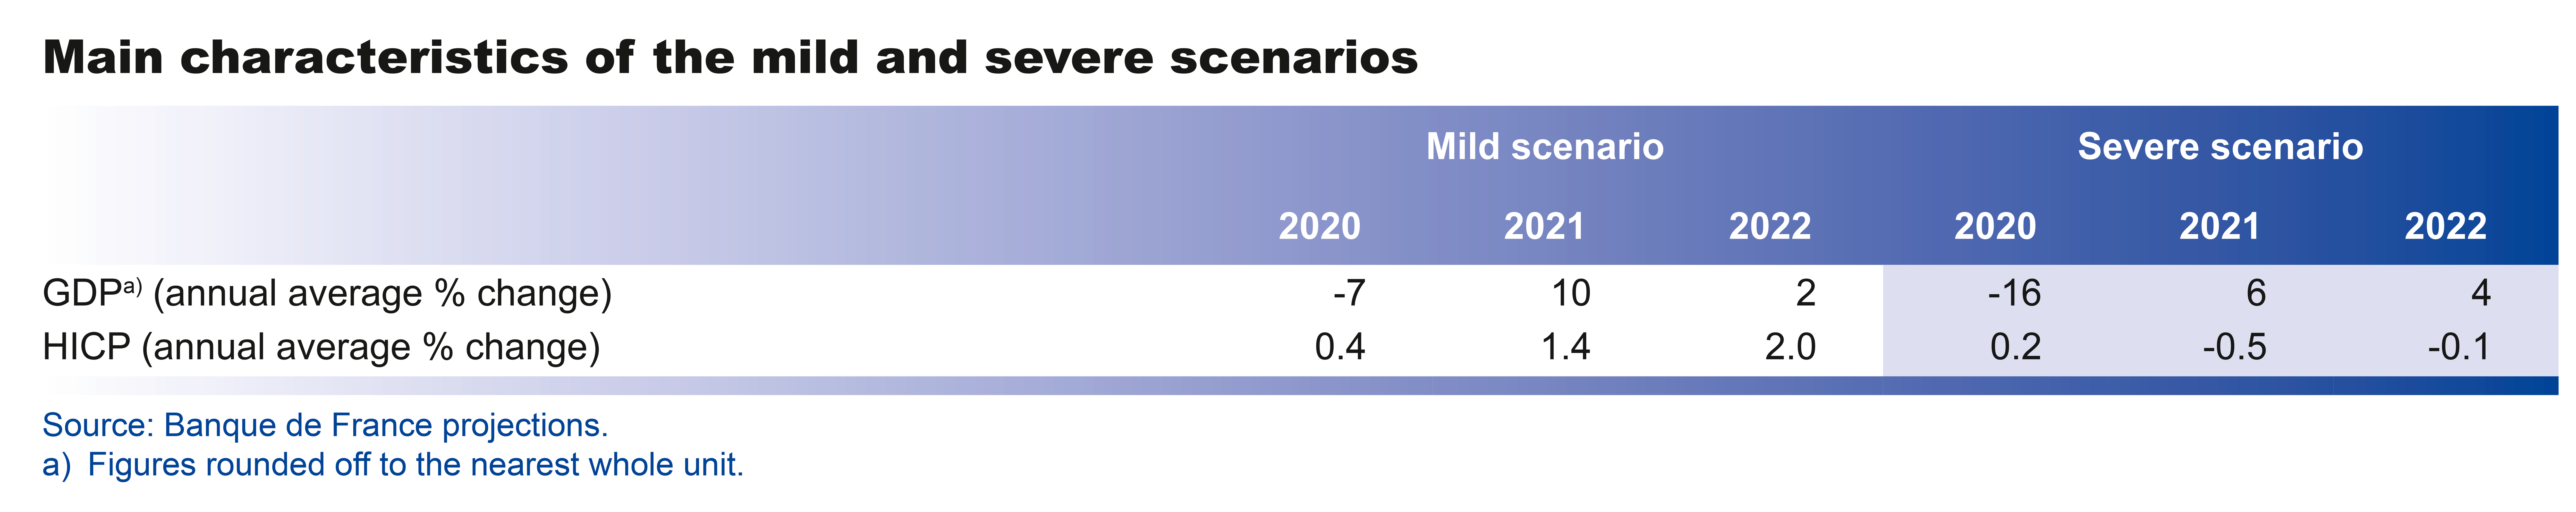 Macroeconomic projections – June 2020 - Main characteristics of the mild and severe scnearios